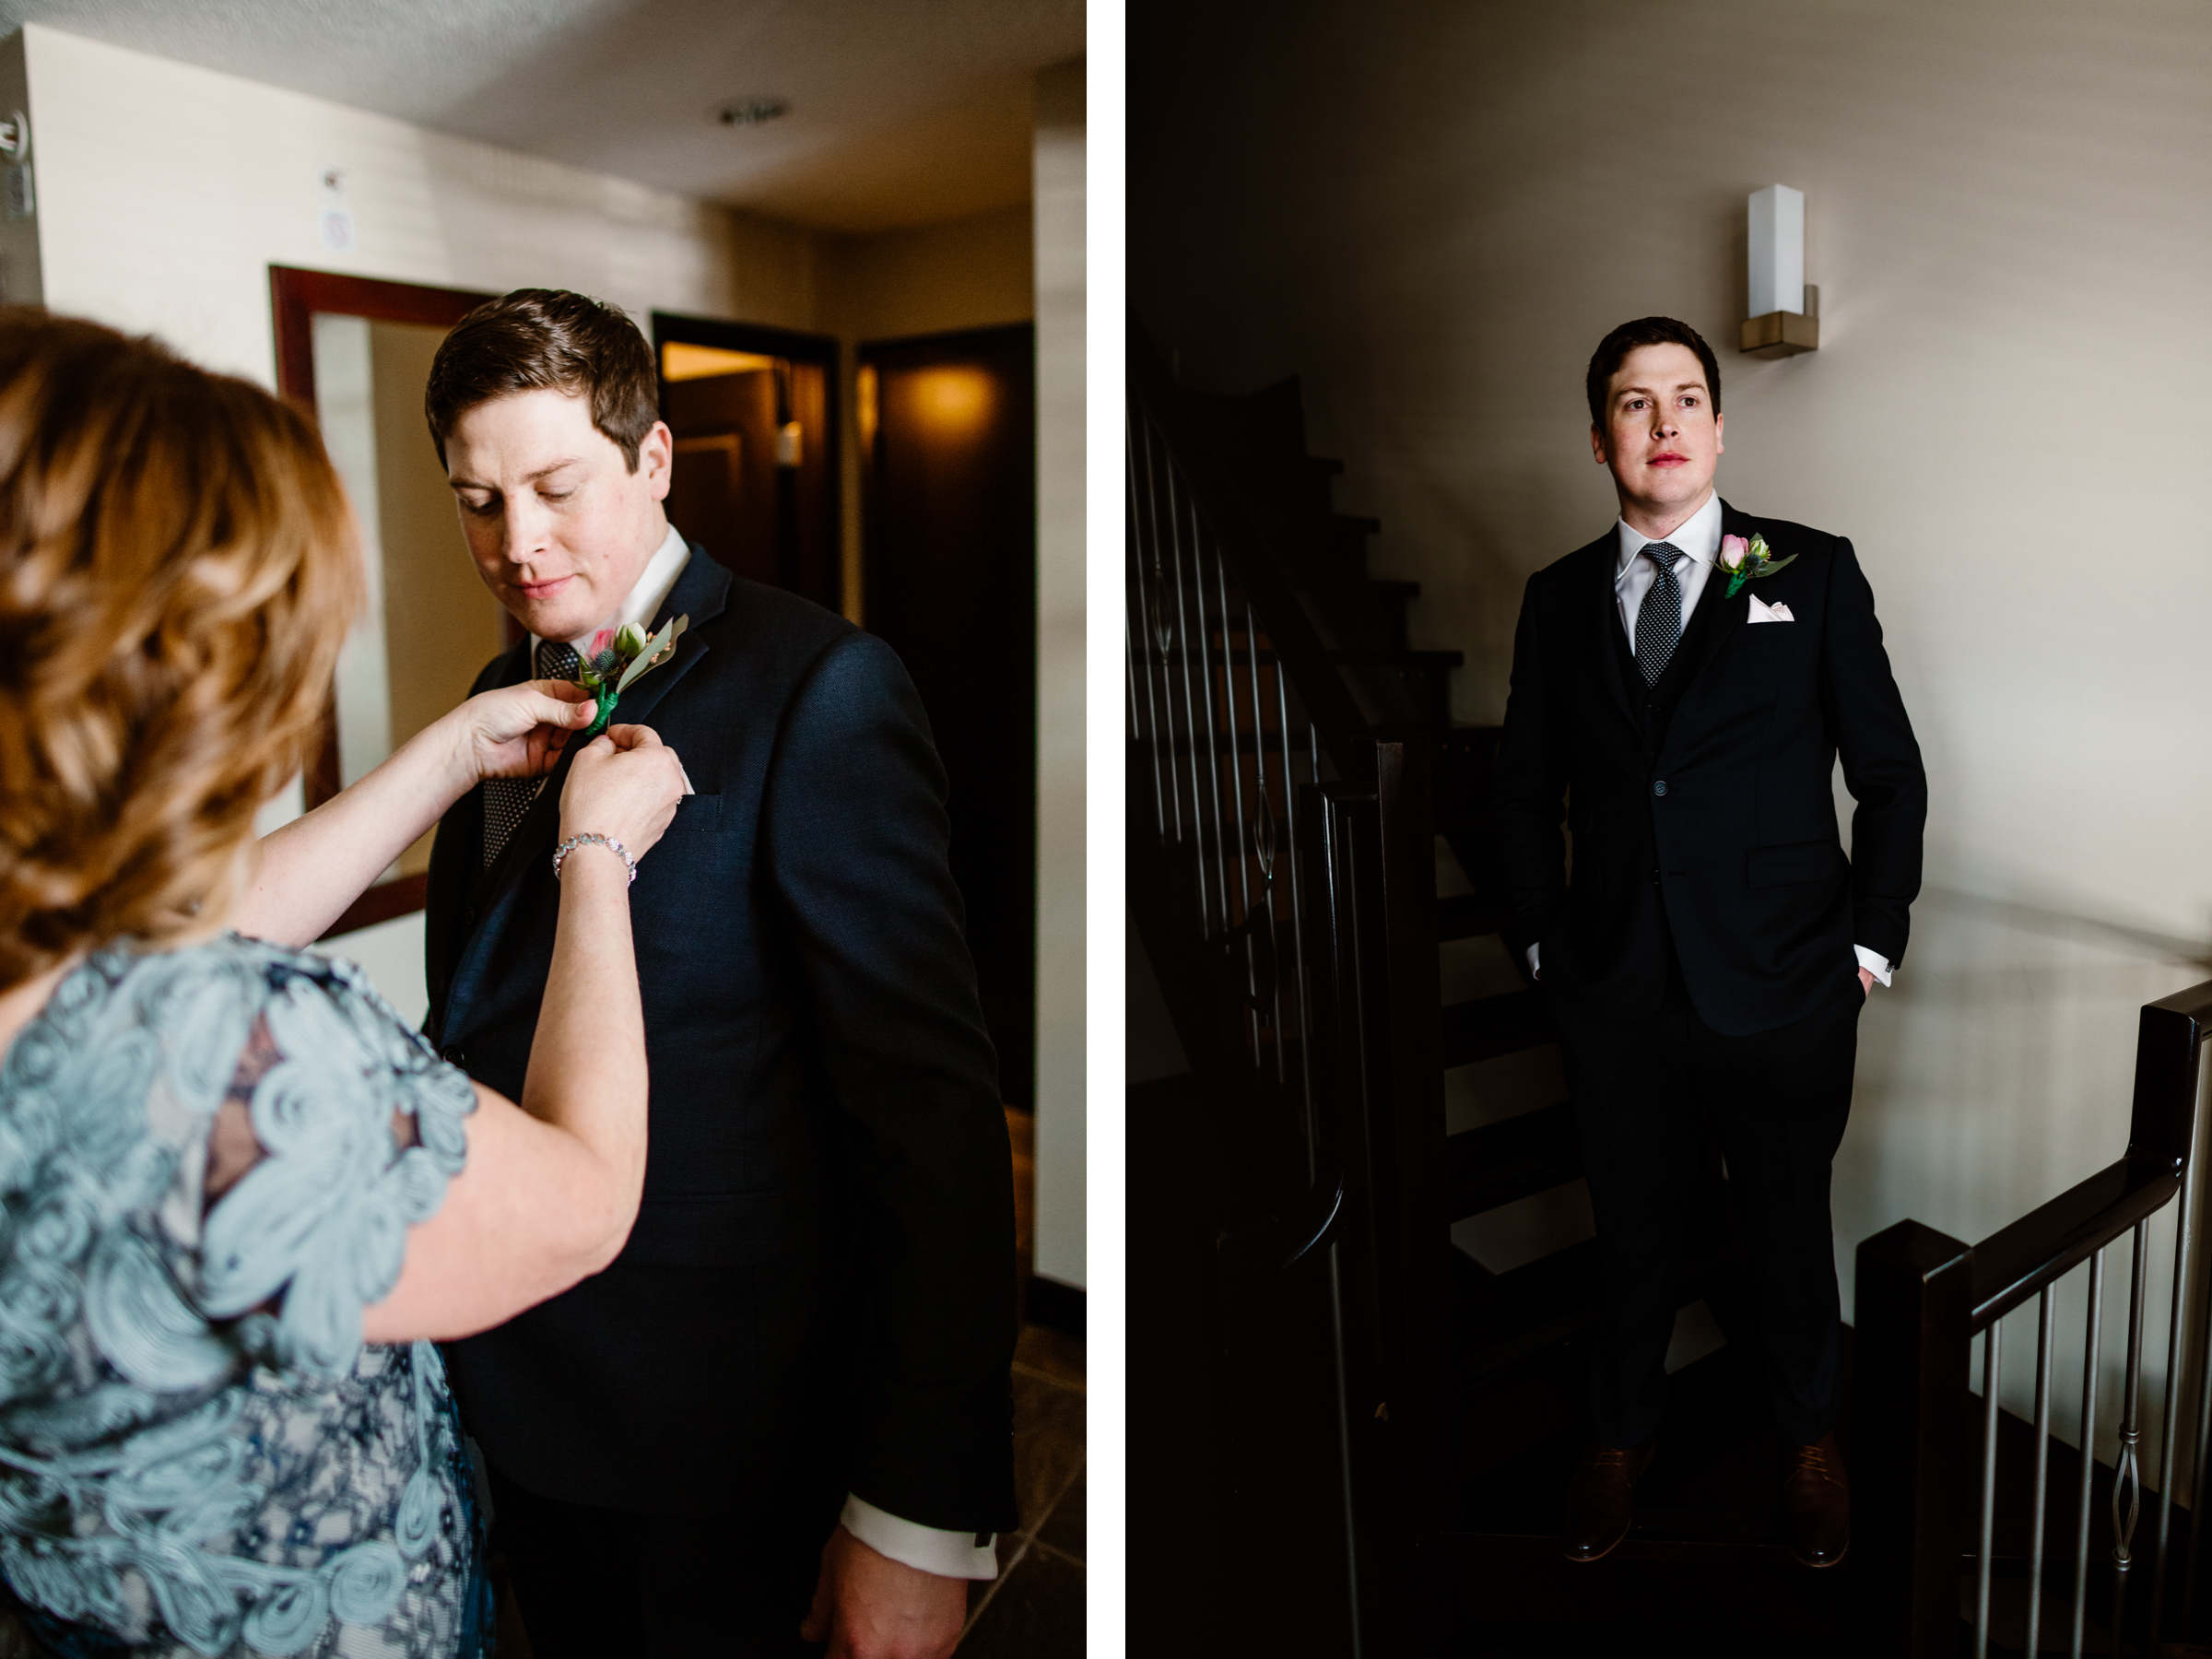 Invermere Wedding Photographers at Eagle Ranch and Panorama Ski Resort - Image 7